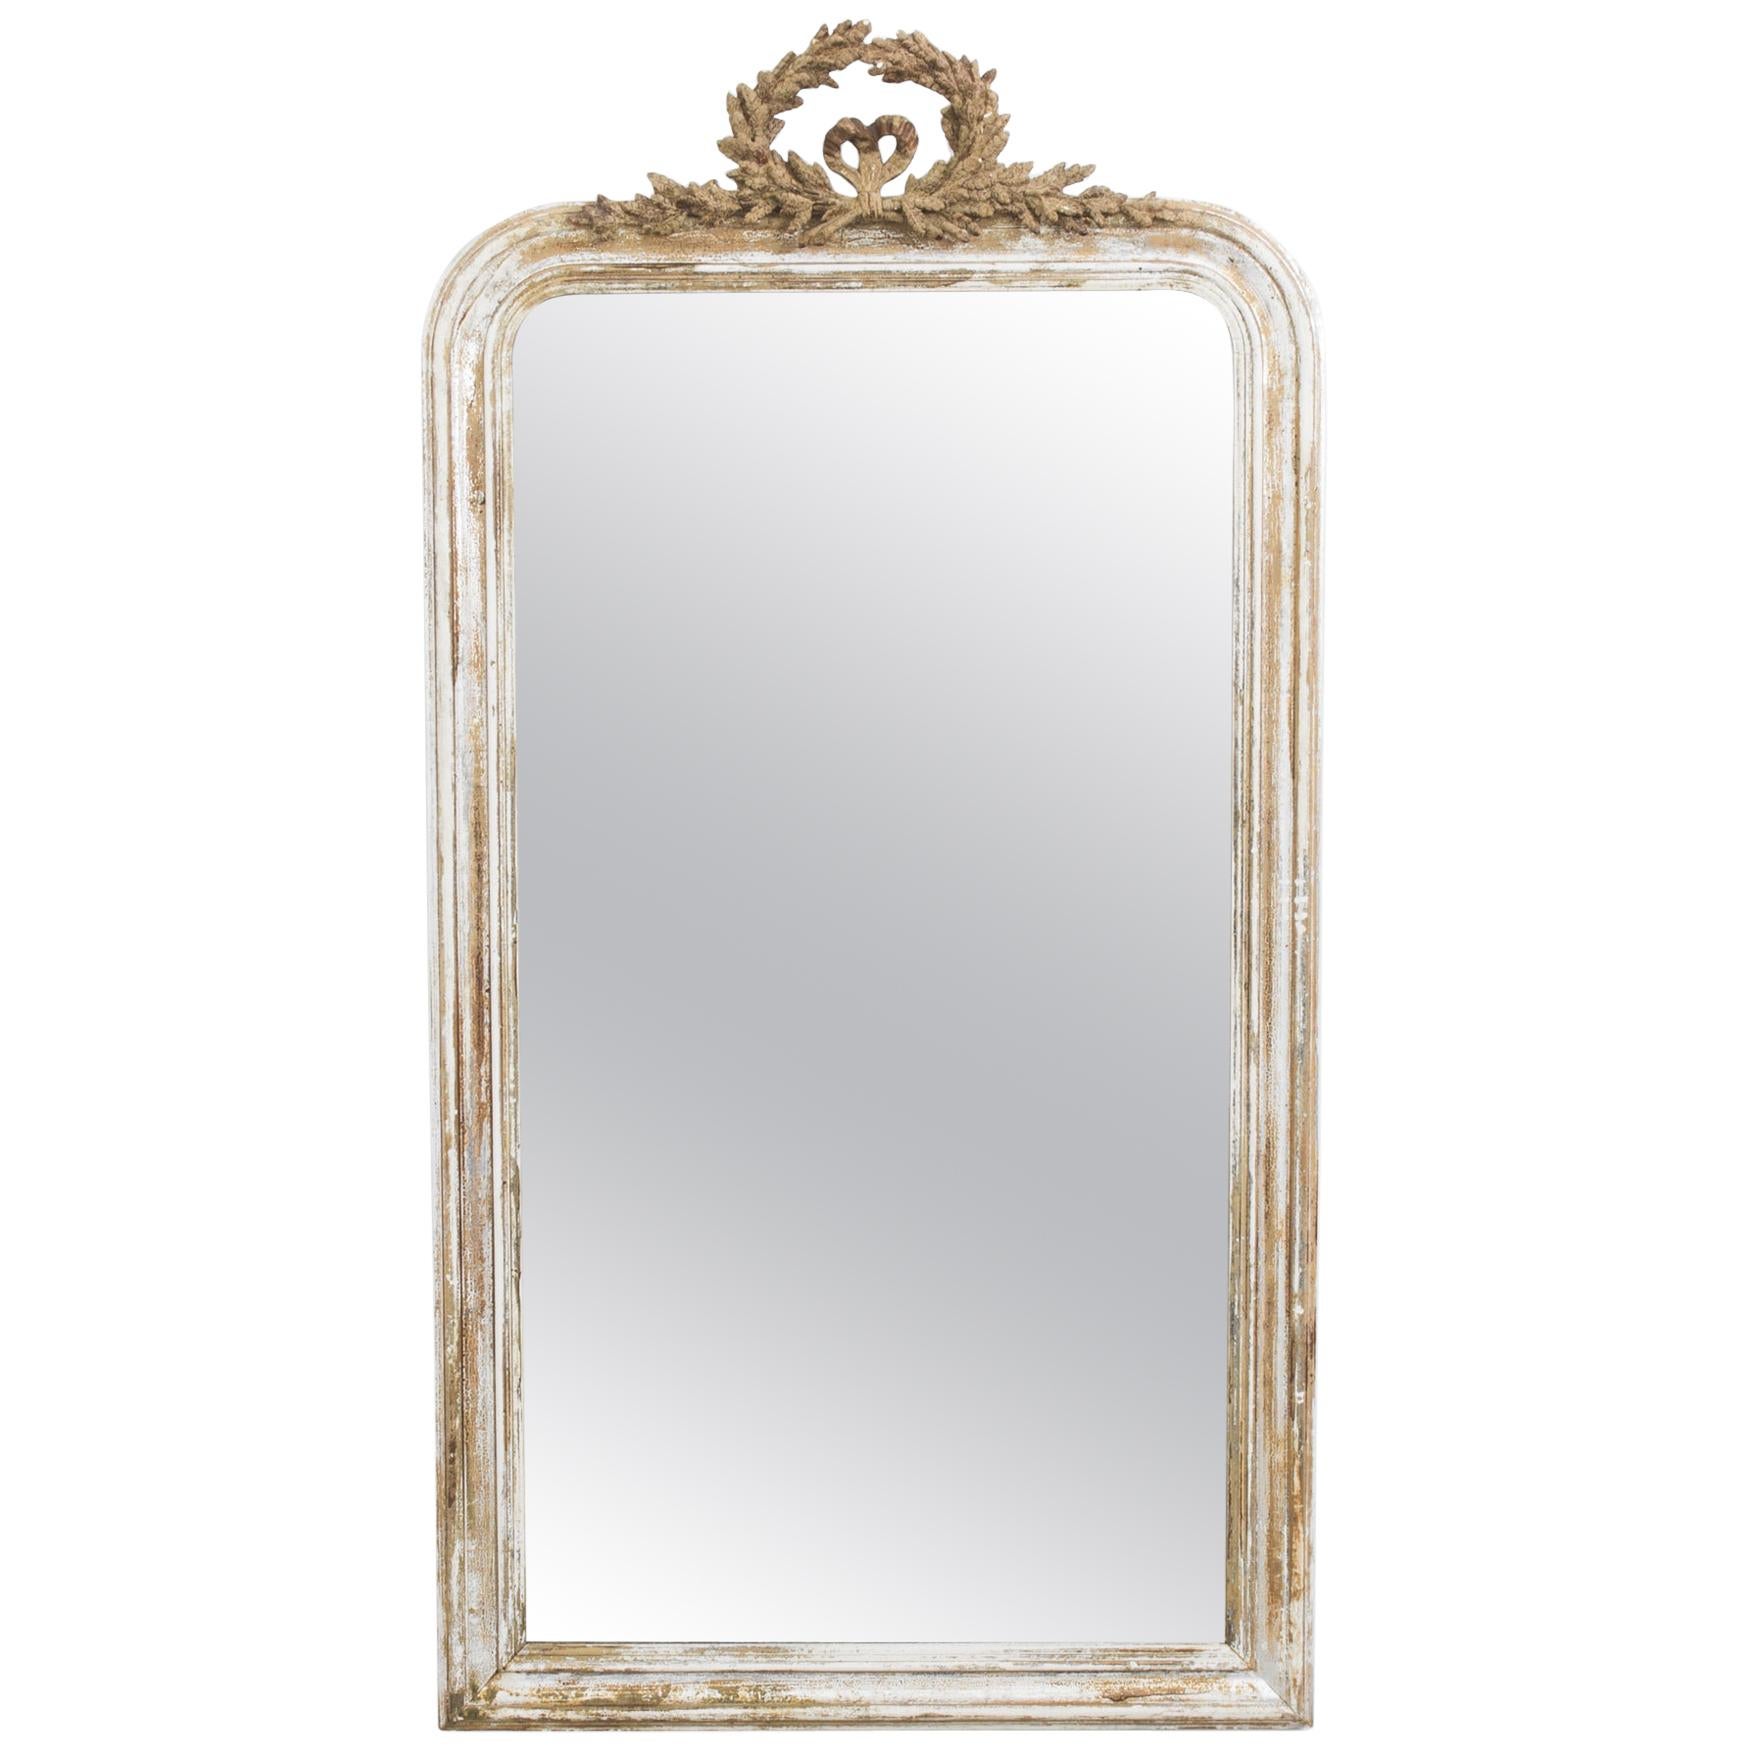 1880s French Gilded Mirror with Laurel Wreath